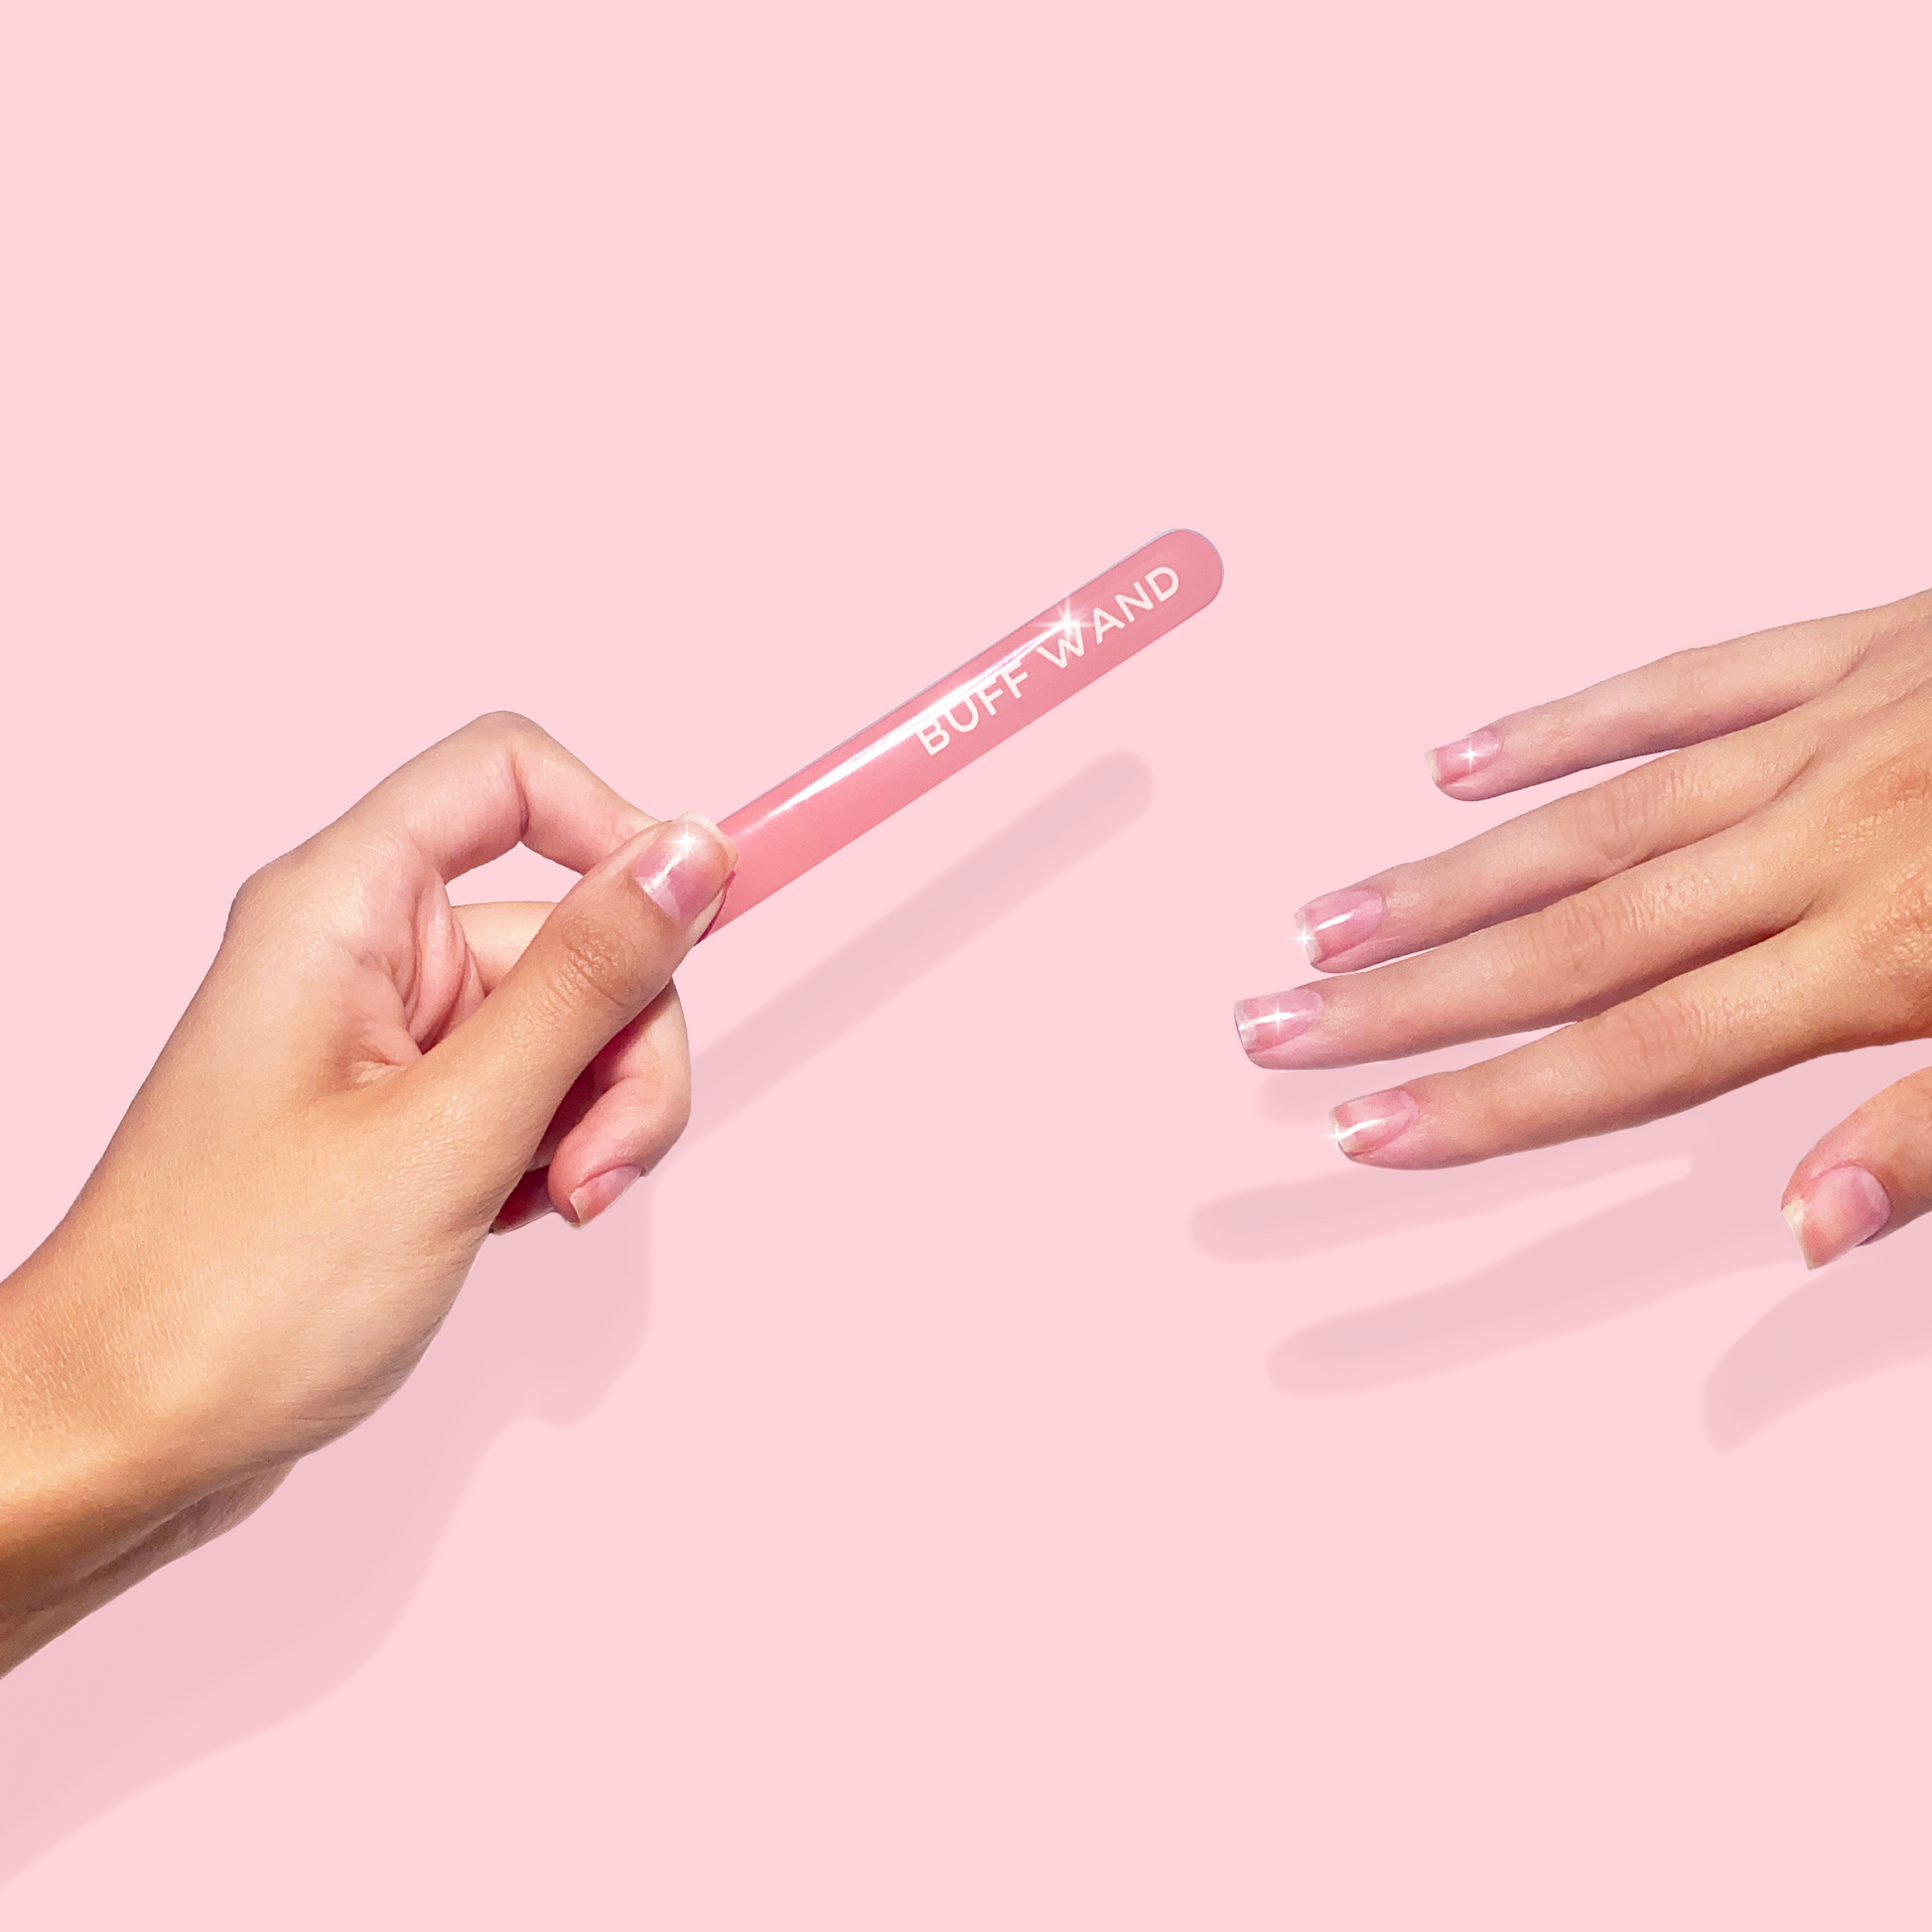 Hands holding buff wand with shiny natural nails